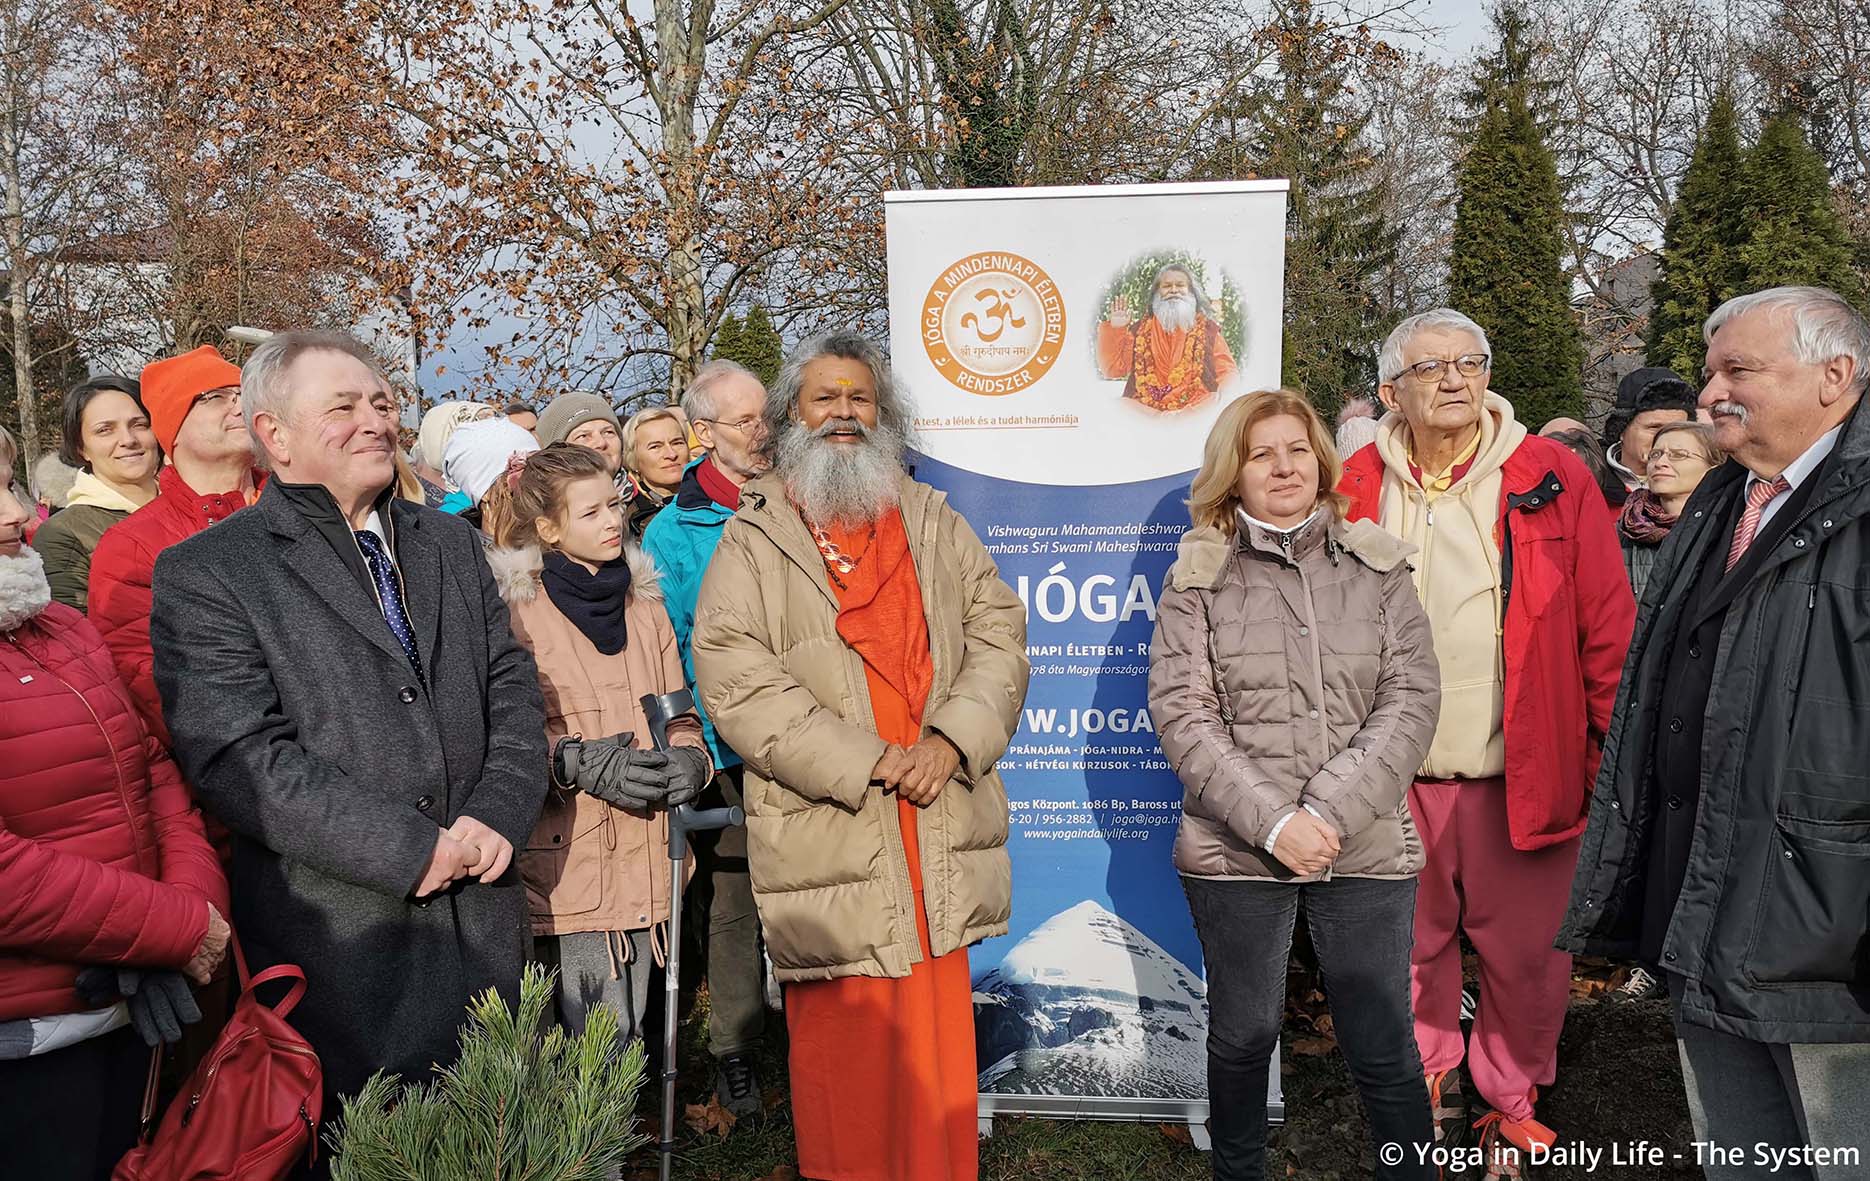 Weekend seminar and planting of Peace Trees in Vep, Hungary